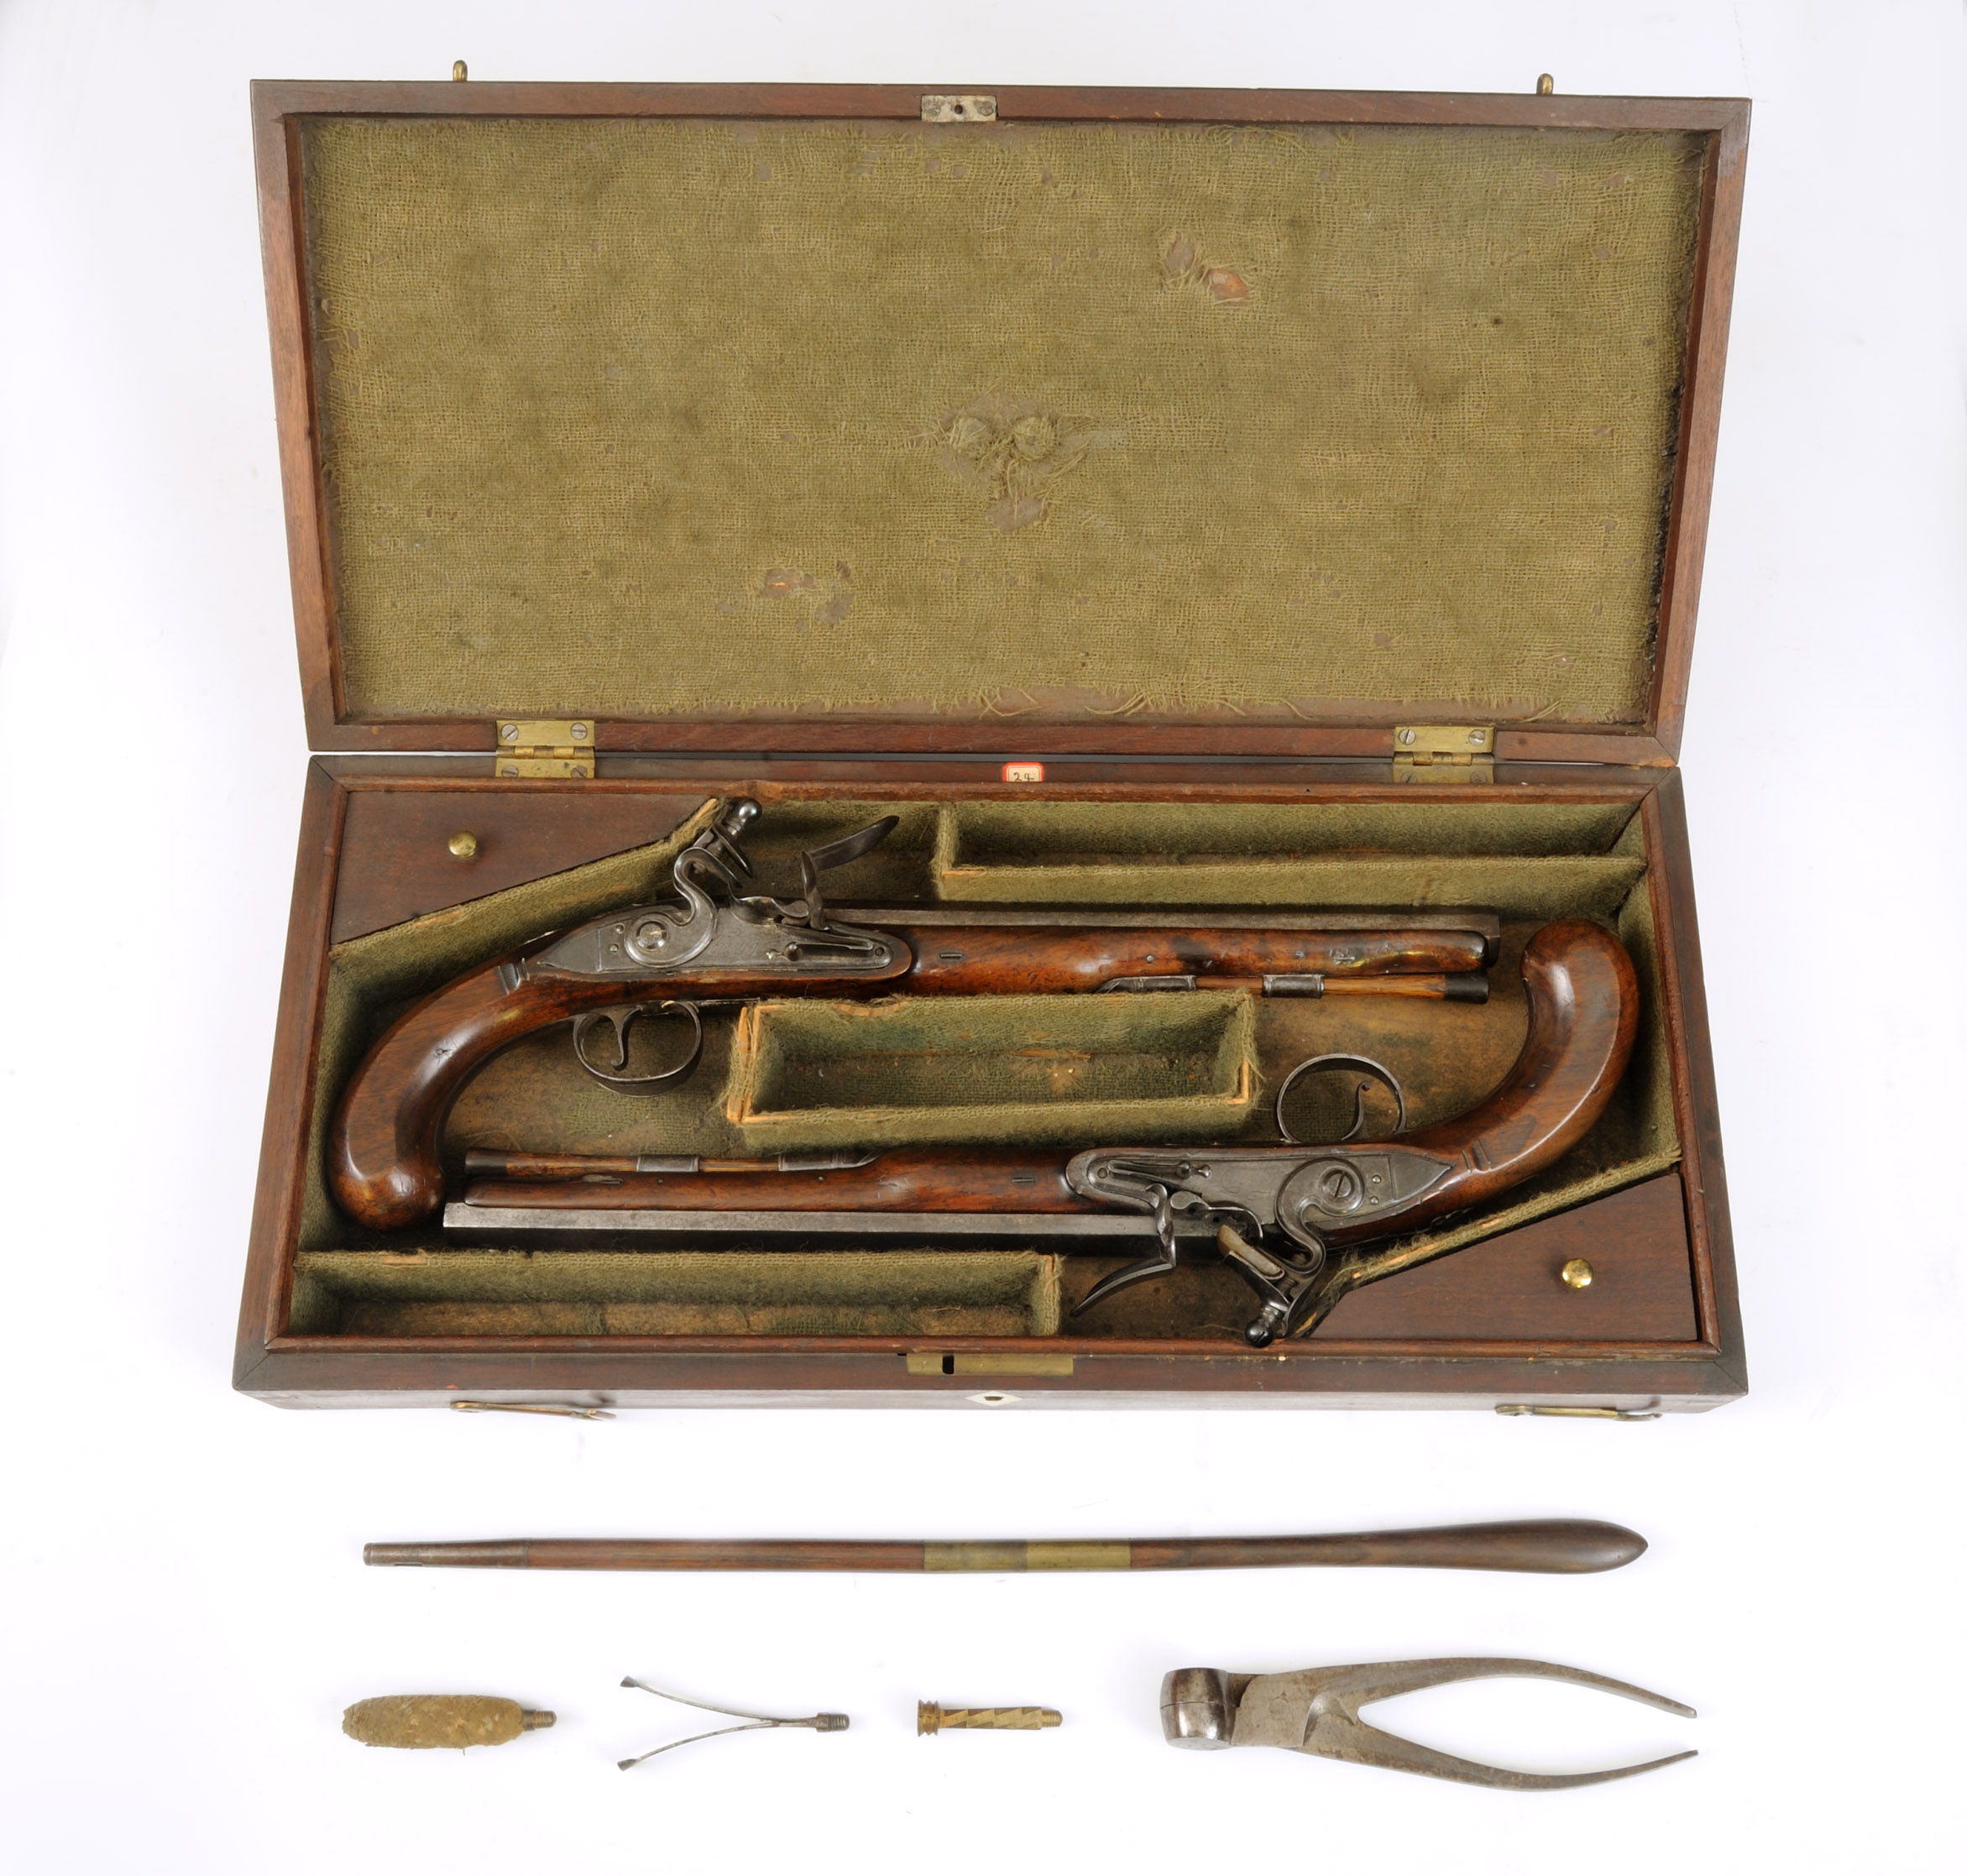 Richard Clough Anderson horseman's pistols, tools and case made by John Twigg, ca. 1775